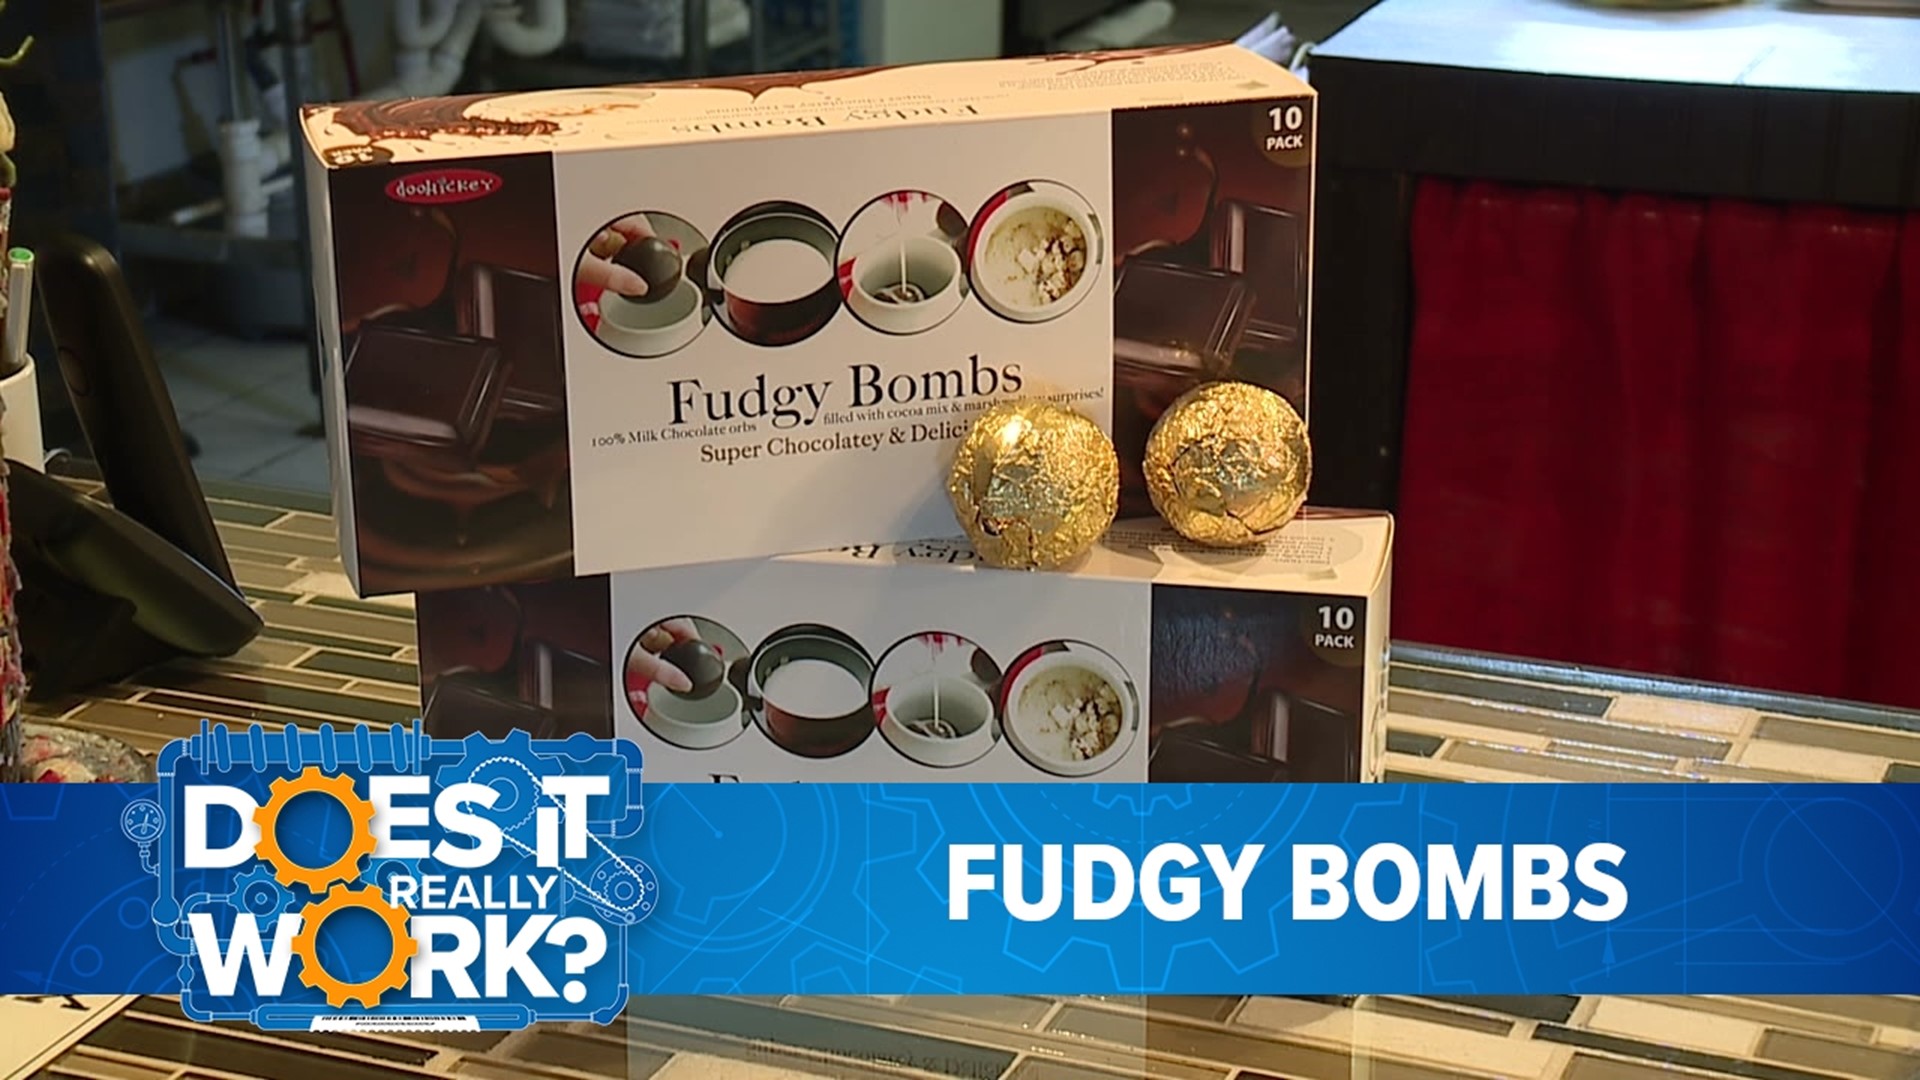 Simply place your Fudgy Bomb into a mug and pour hot milk or water over it. Watch it go as it transforms, releasing the hot cocoa and marshmallows.